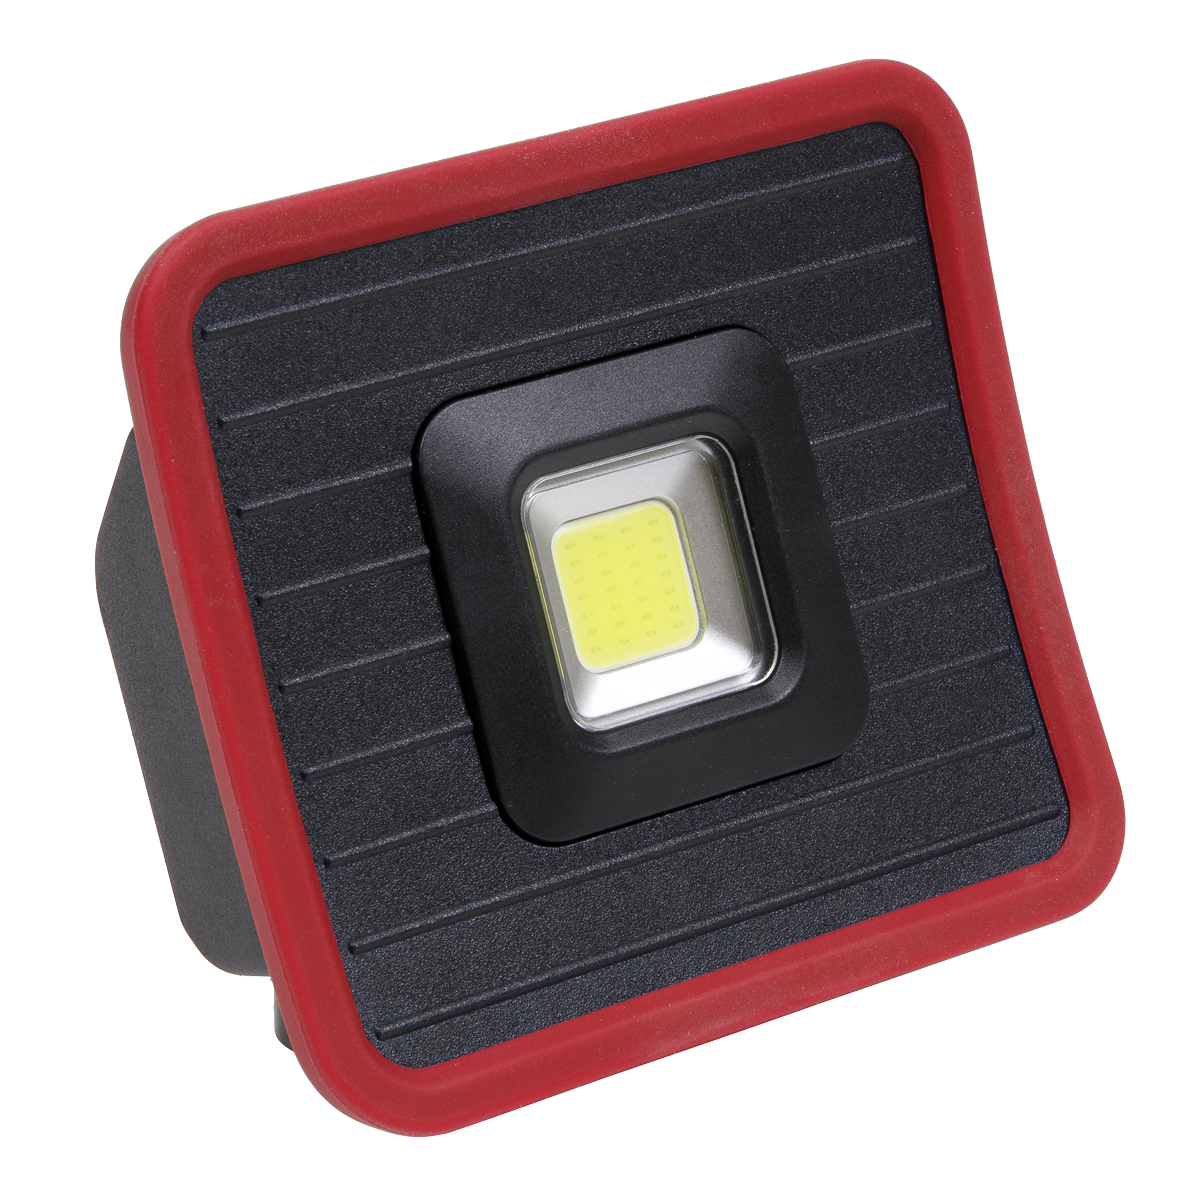 Rechargeable Pocket Floodlight with Power Bank 10W COB LED - LED1000PB - Farming Parts